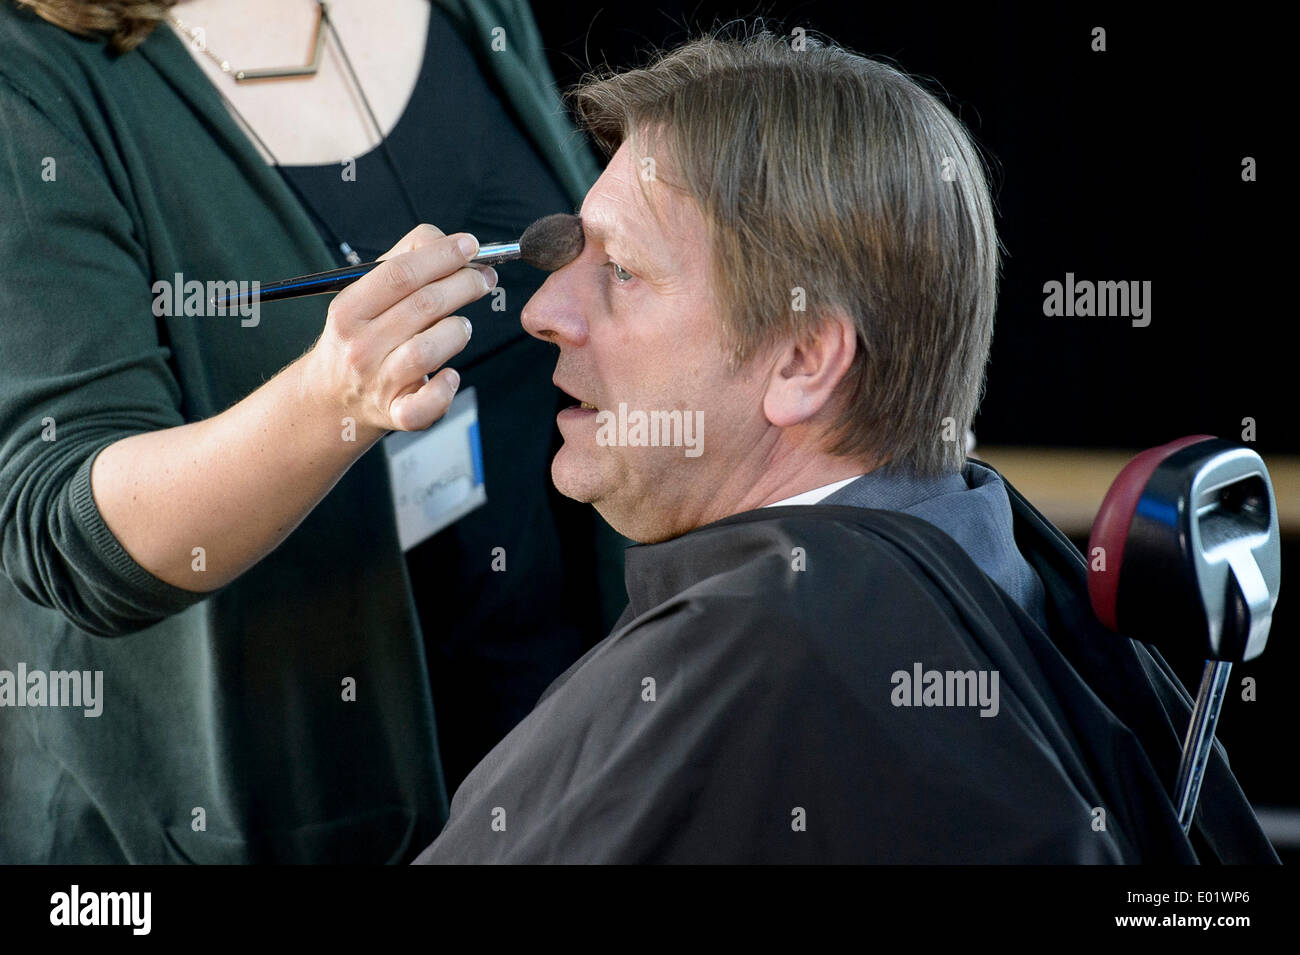 Brussels, Belgium. 29th April 2014. Guy Verhofstadt, top candidate of Liberals (ALDE) receives the make-up ahead of Euranet's 'Big Crunch' Presidential debate at the EU parliament in BrusselsThe four top candidates for the presidency of the European Commission - Jean-Claude Juncker, Ska Keller, Martin Schulz and Guy Verhofstadt - attend EU-wide debate organized by EuranetPlus and focused on the major election topics. Credit:  dpa picture alliance/Alamy Live News Stock Photo